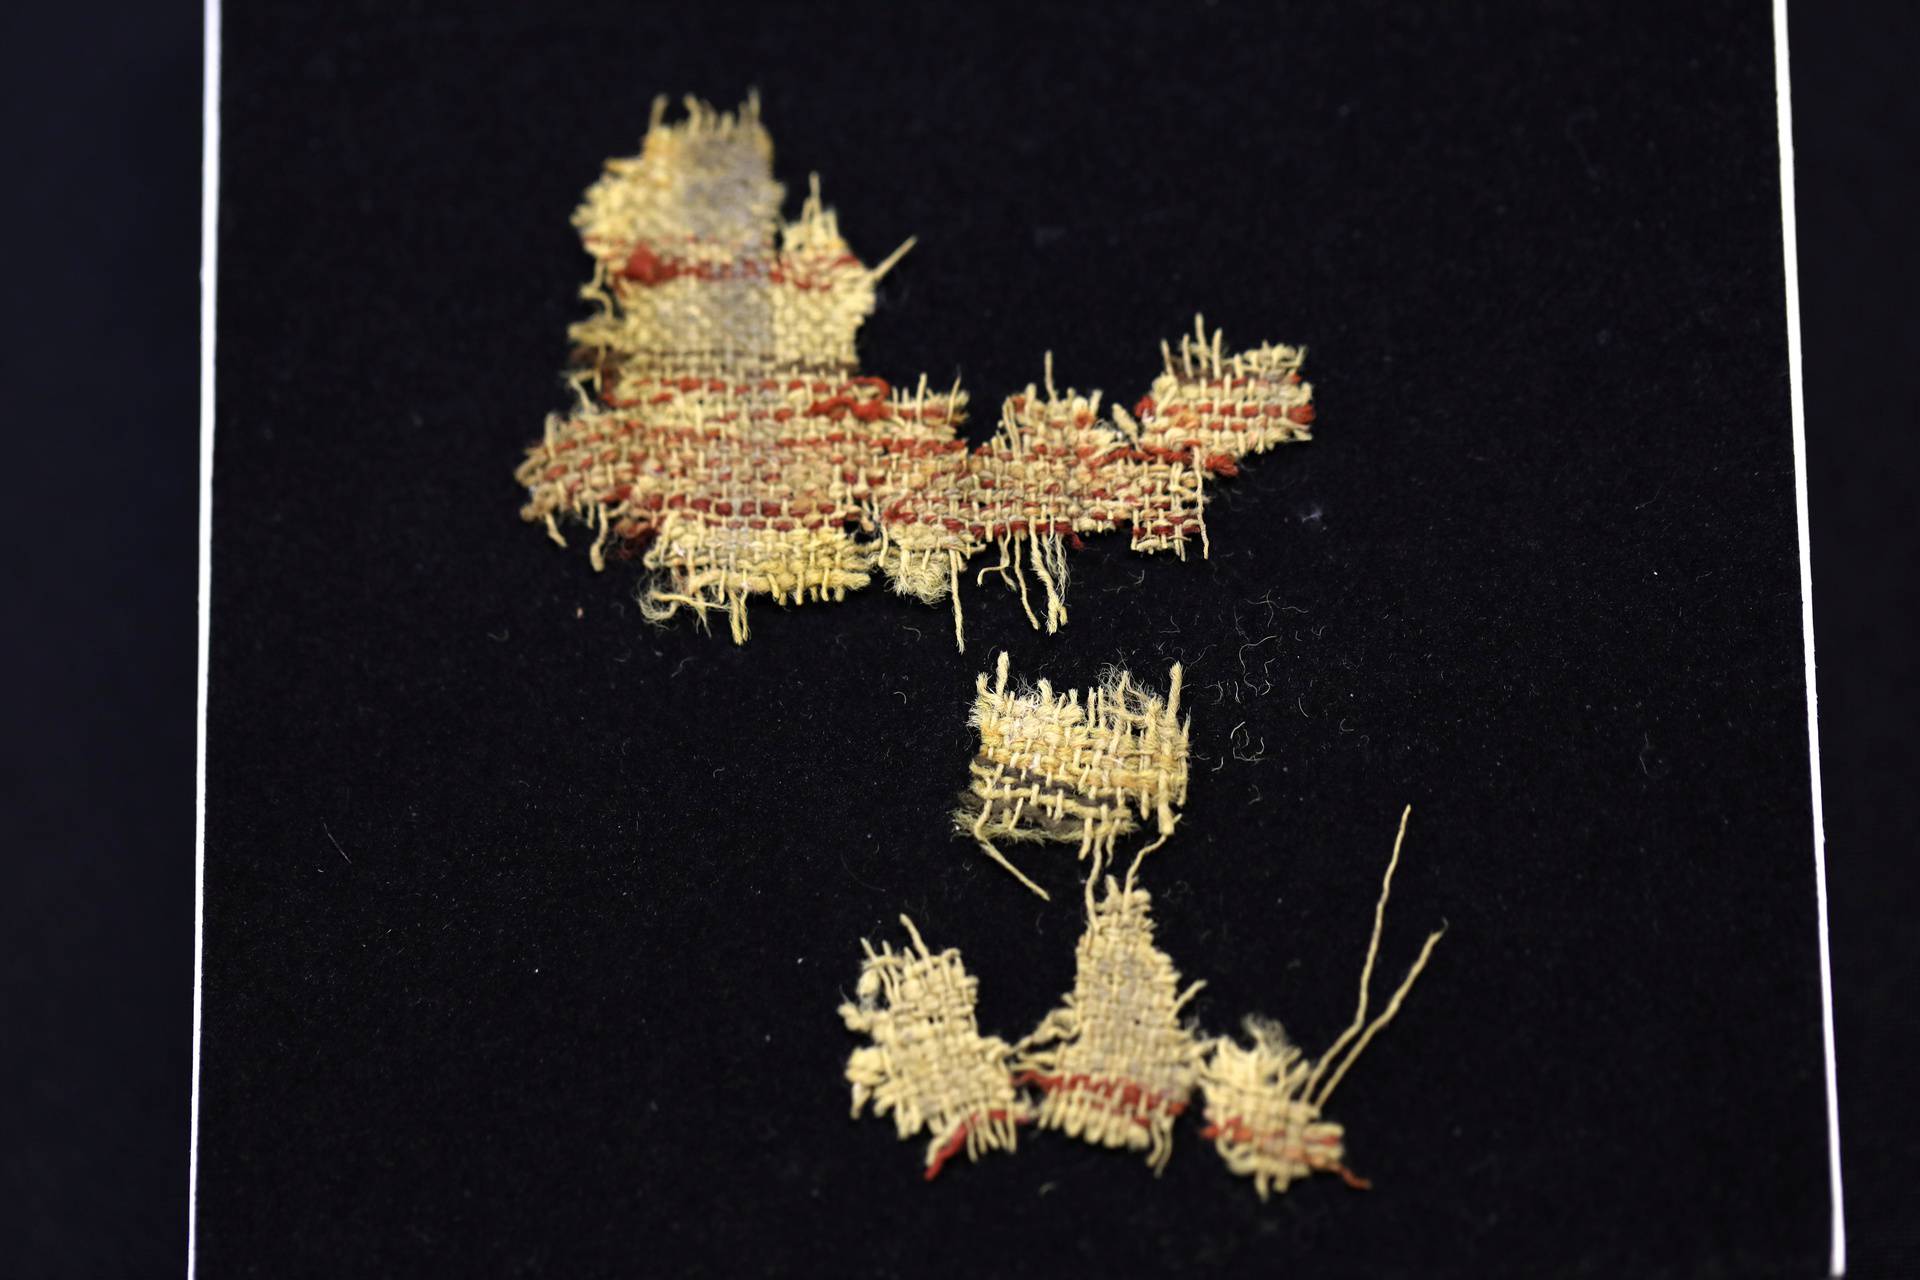 Woven fabric, part of various ancient artefacts recently discovered in the Judean Desert caves, along with scroll fragments of an ancient biblical texts, is seen during an unveiling event for media at Israel Antiquities Authority laboratories in Jerusalem